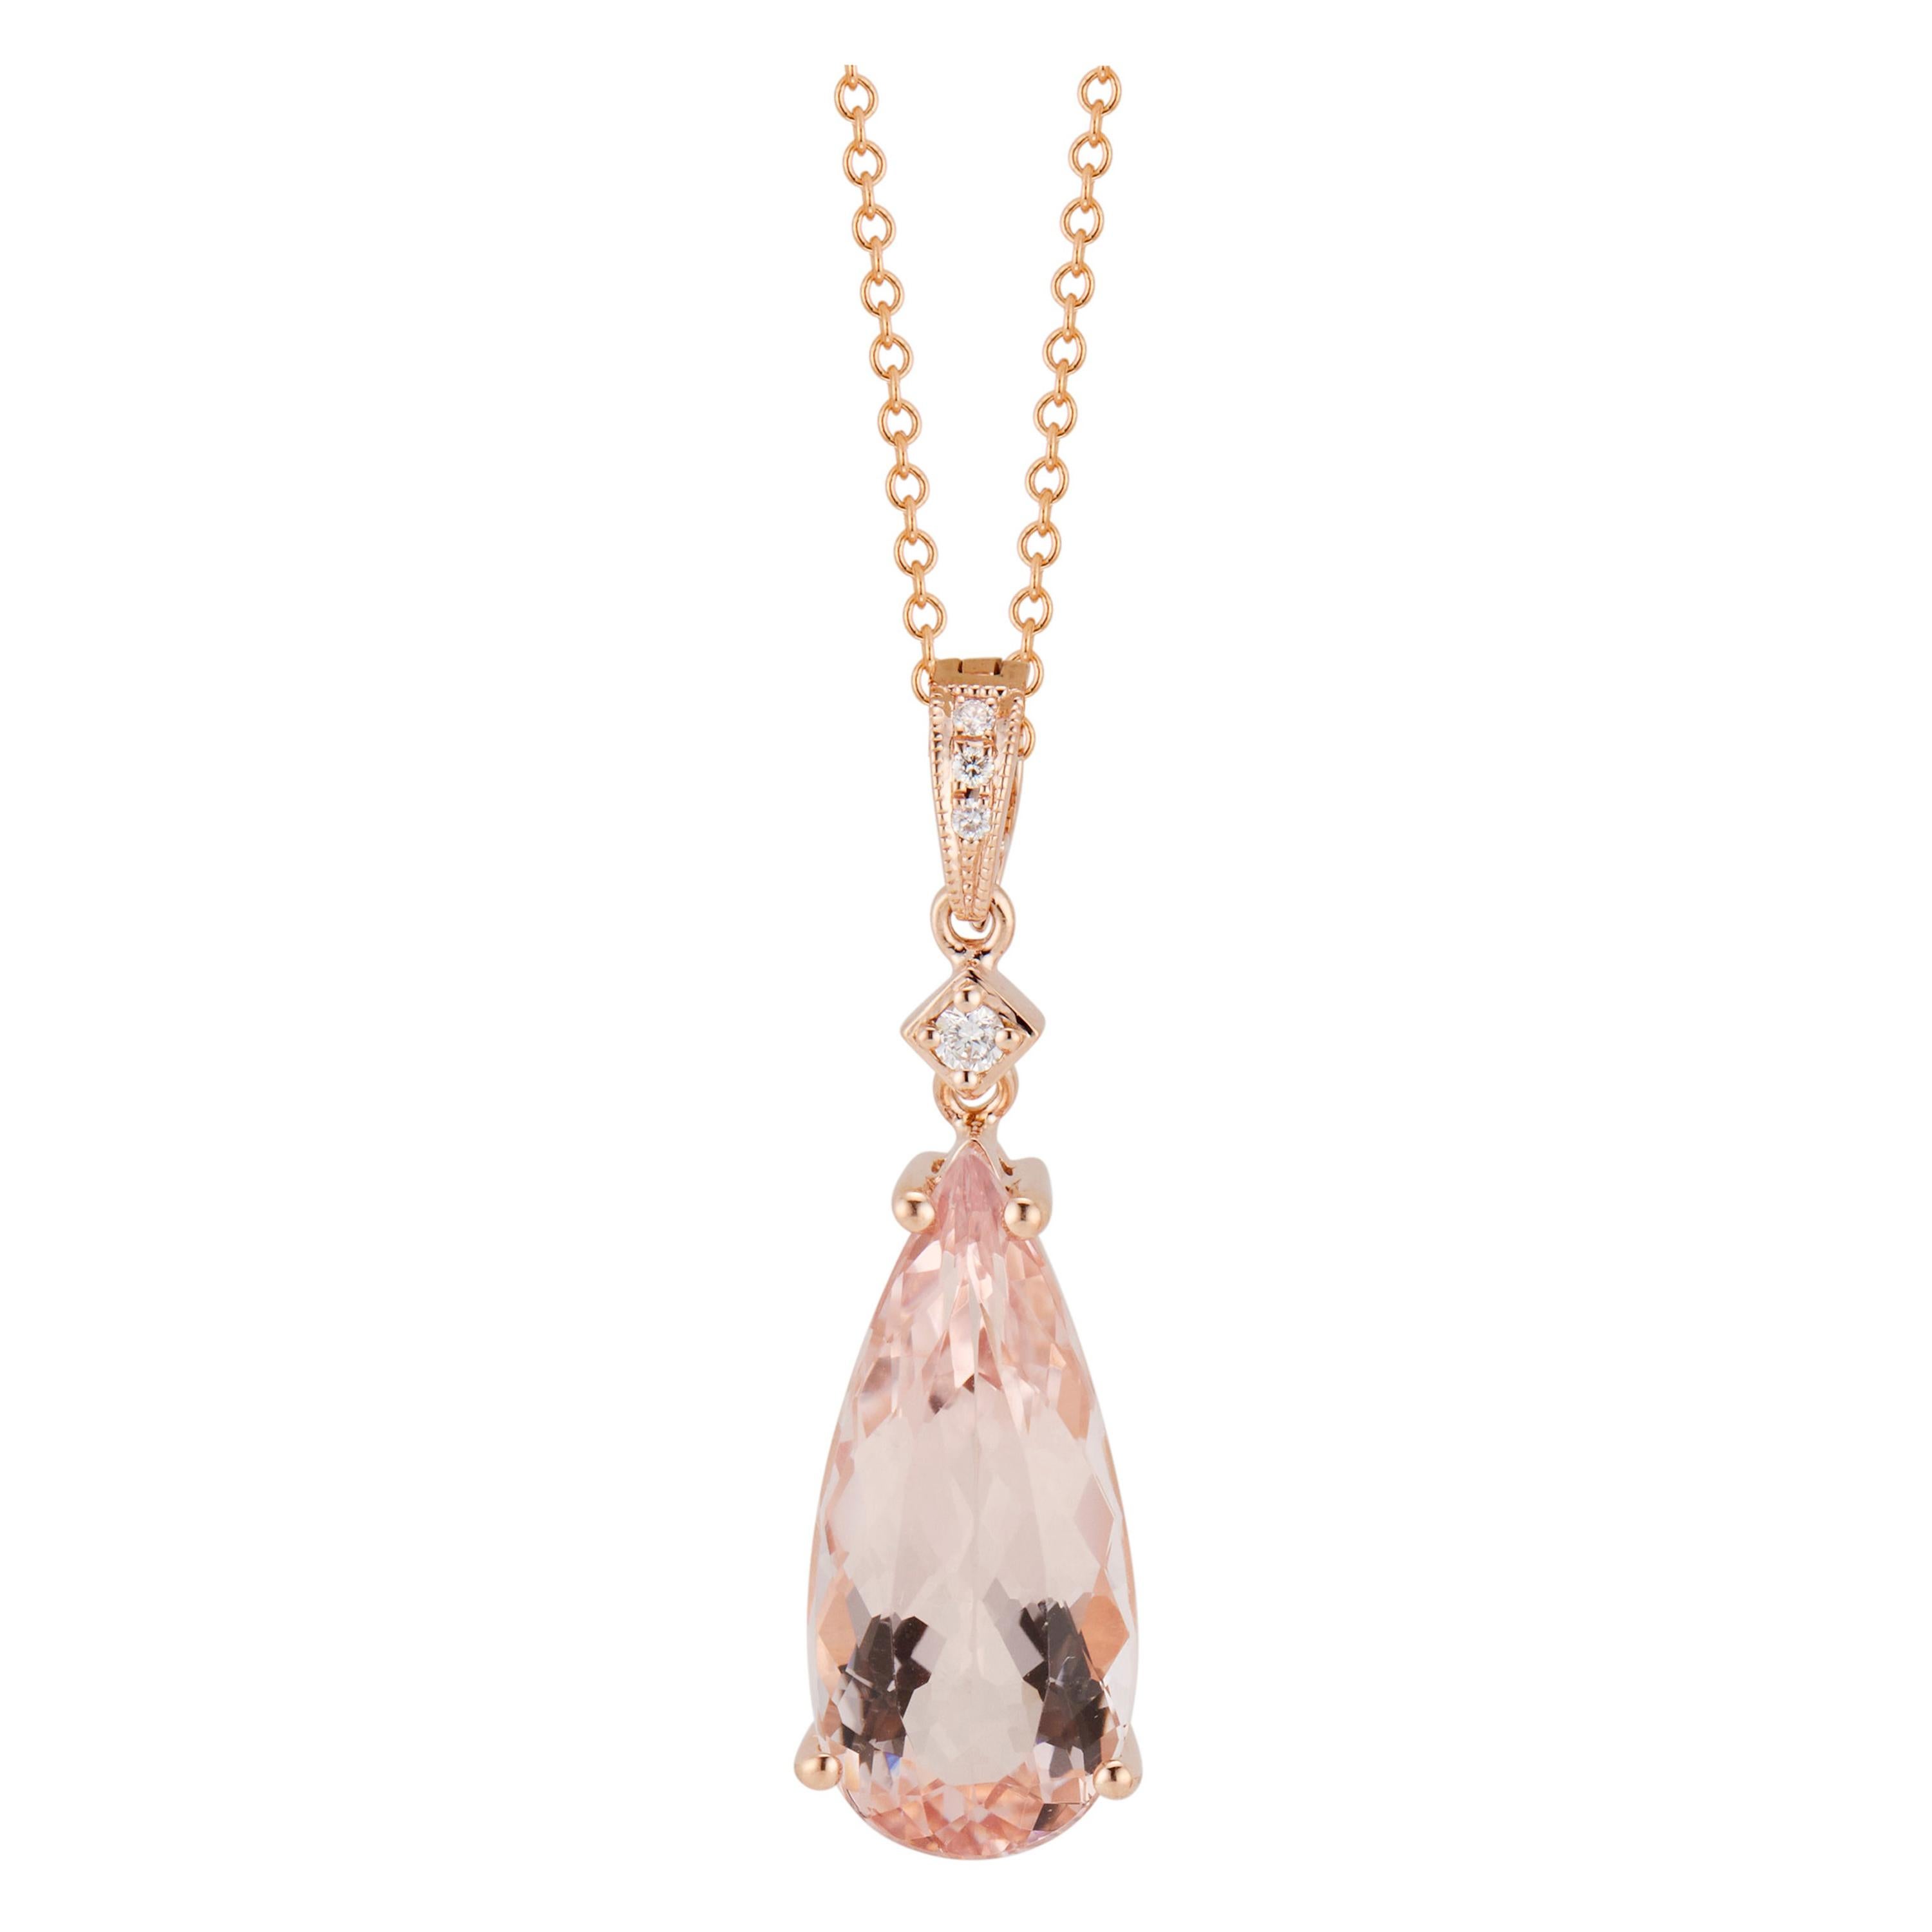 Peter Suchy 4.38 Carat Pink Morganite Diamond Rose Gold Pendant Necklace For Sale